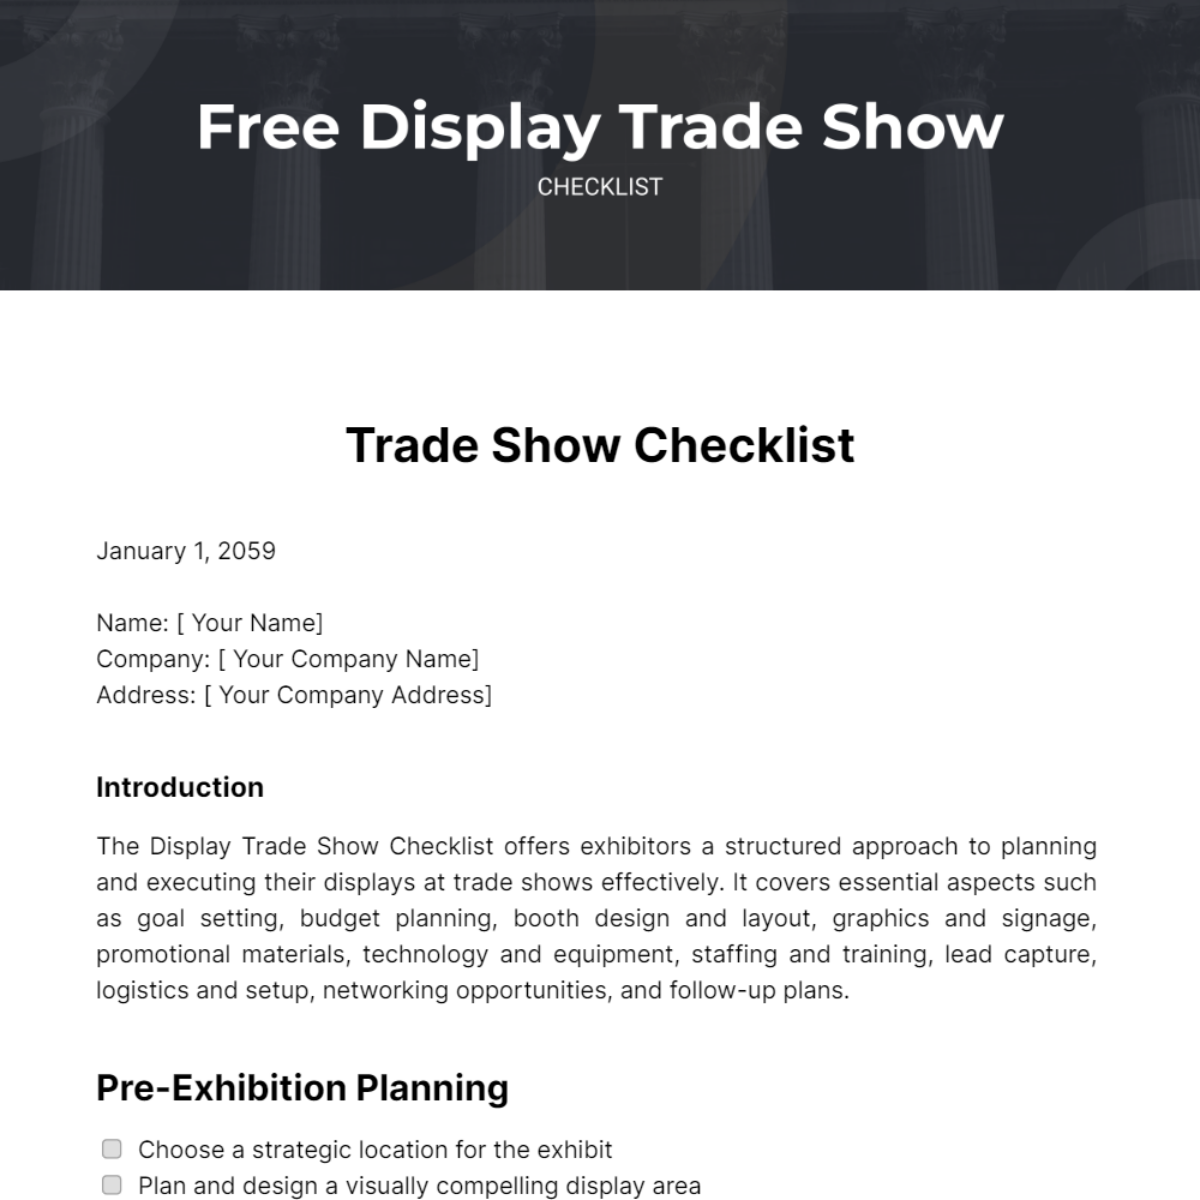 Free Display Trade Show Checklist Template